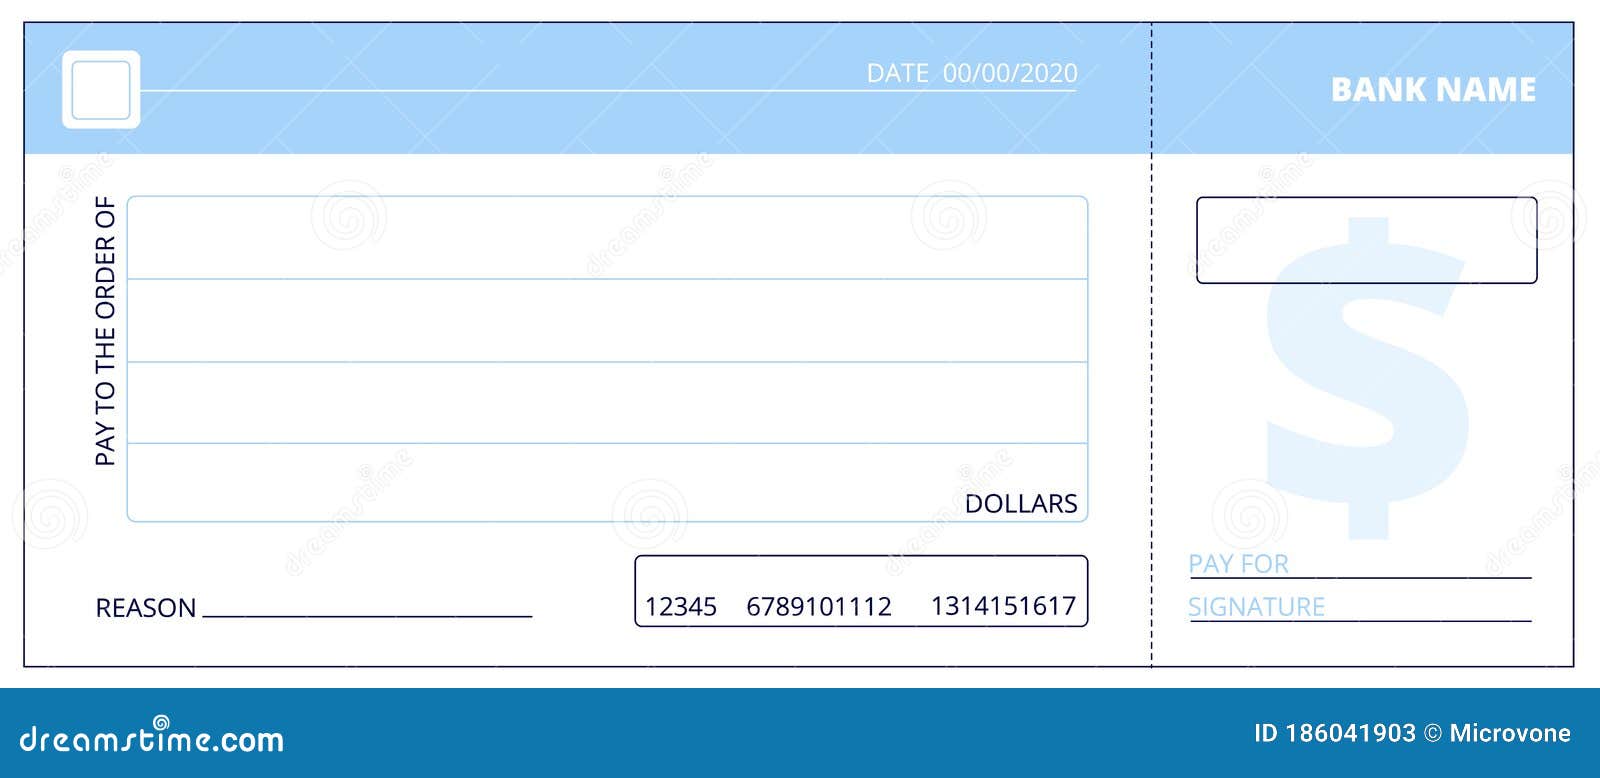 Blank Check Template. Business Cheque Book Design. Bank Checking Within Blank Business Check Template